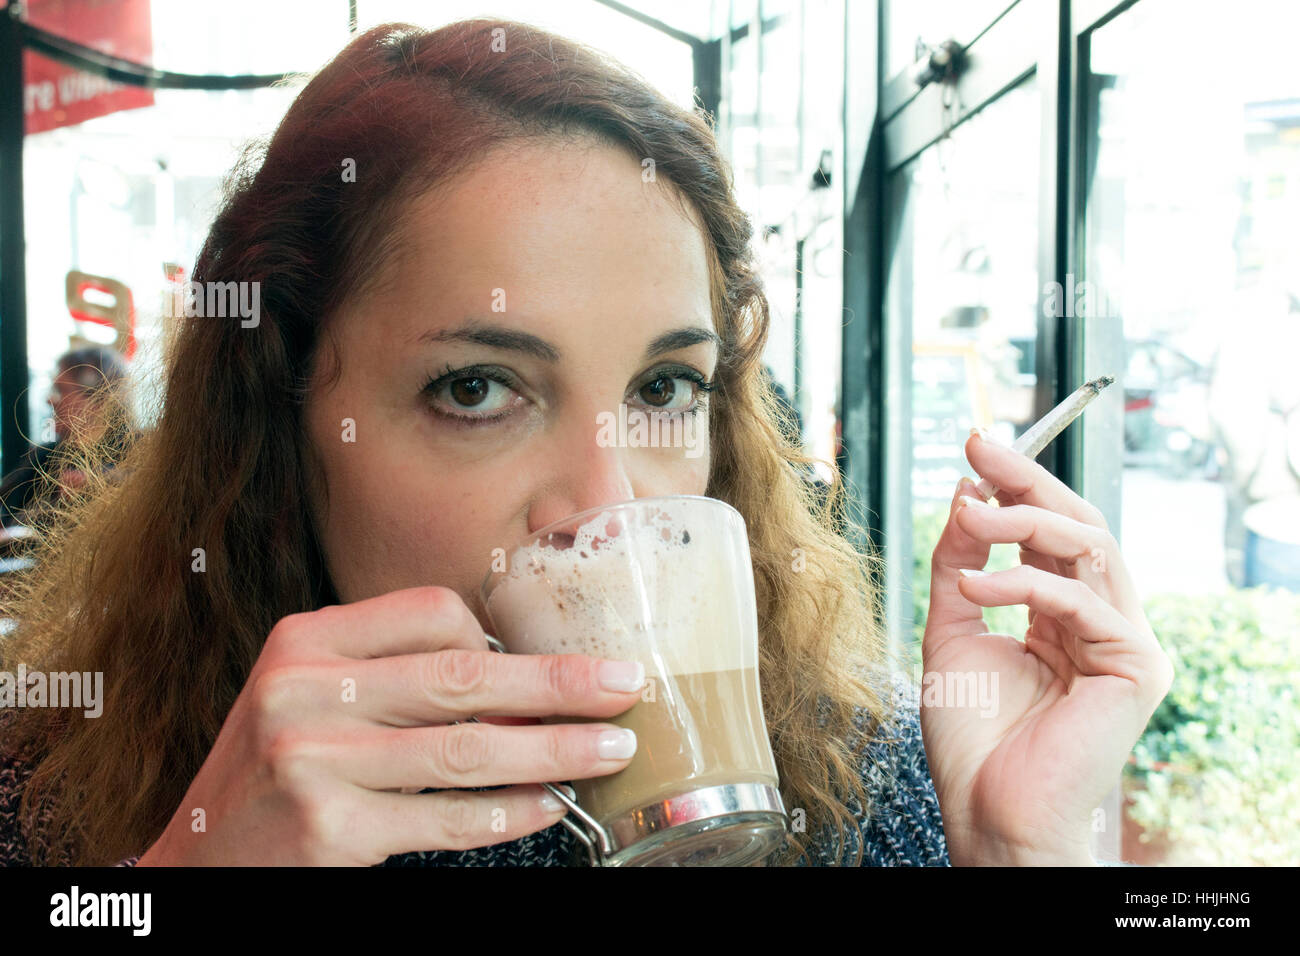 Portrait Woman with Cigarette Drinking a Coffee. Stock Photo